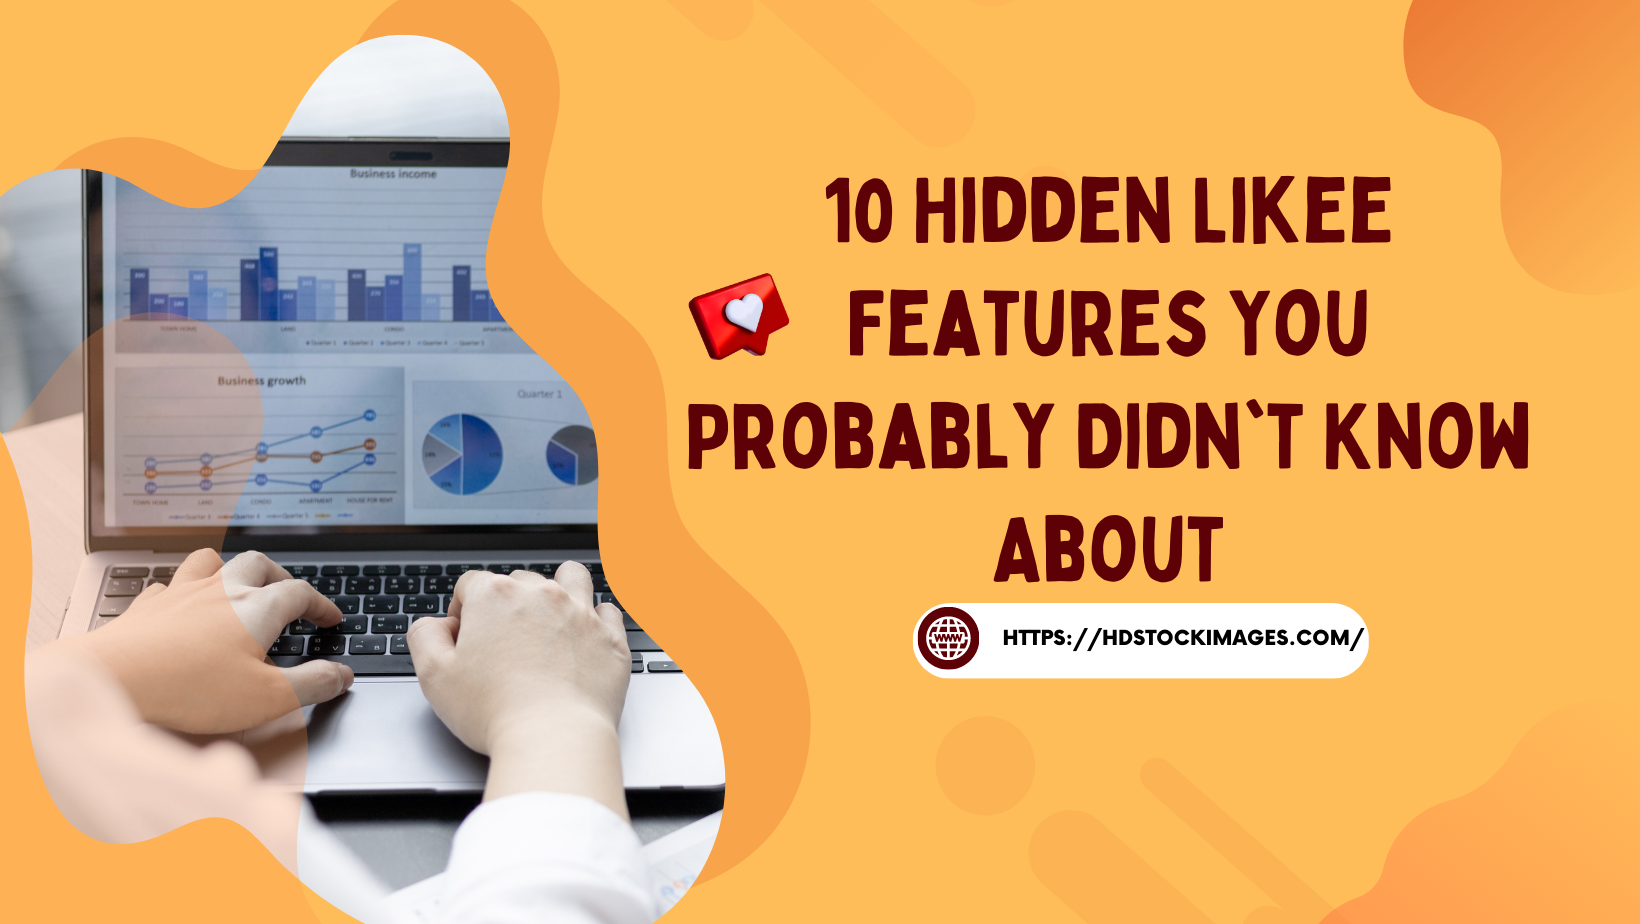 10 Hidden Likee Features You Probably Didn't Know About